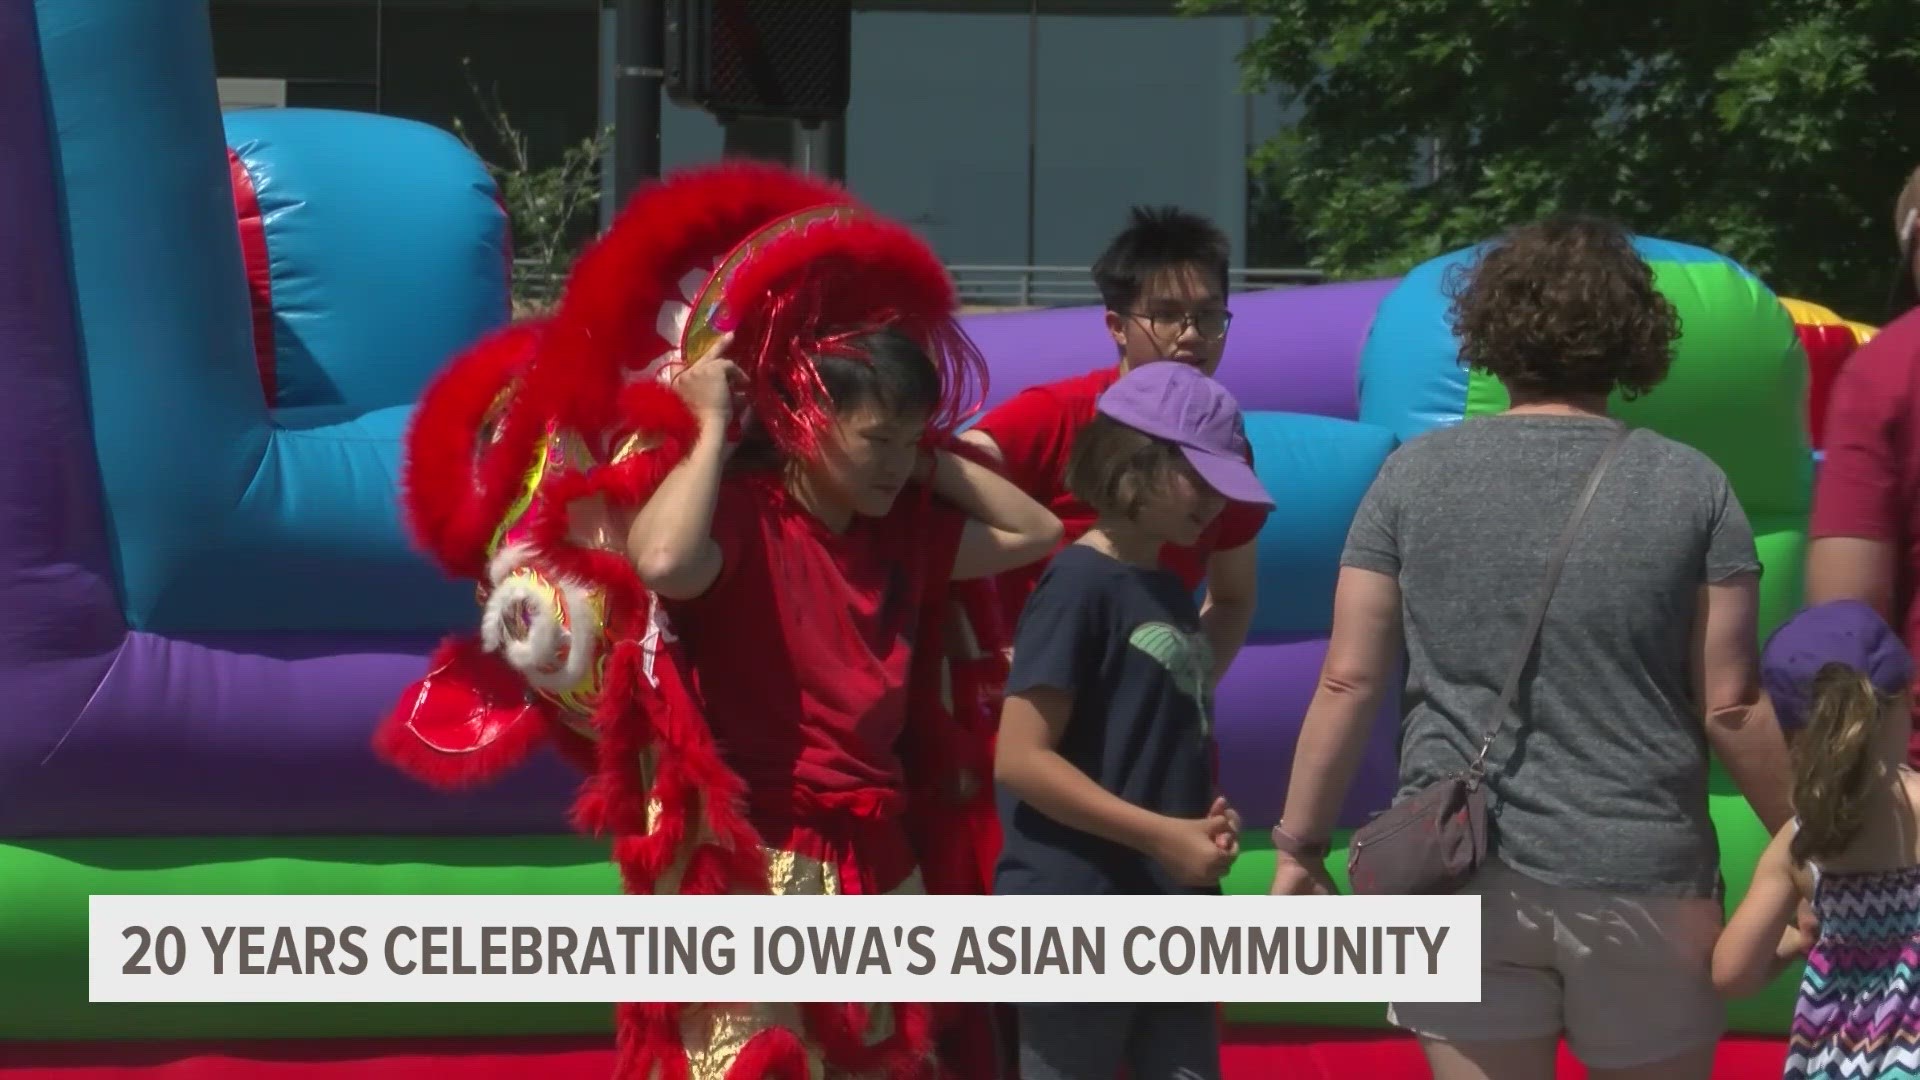 The festival, hosted by the Iowa Asian Alliance, is the largest Asian-American event in Iowa.